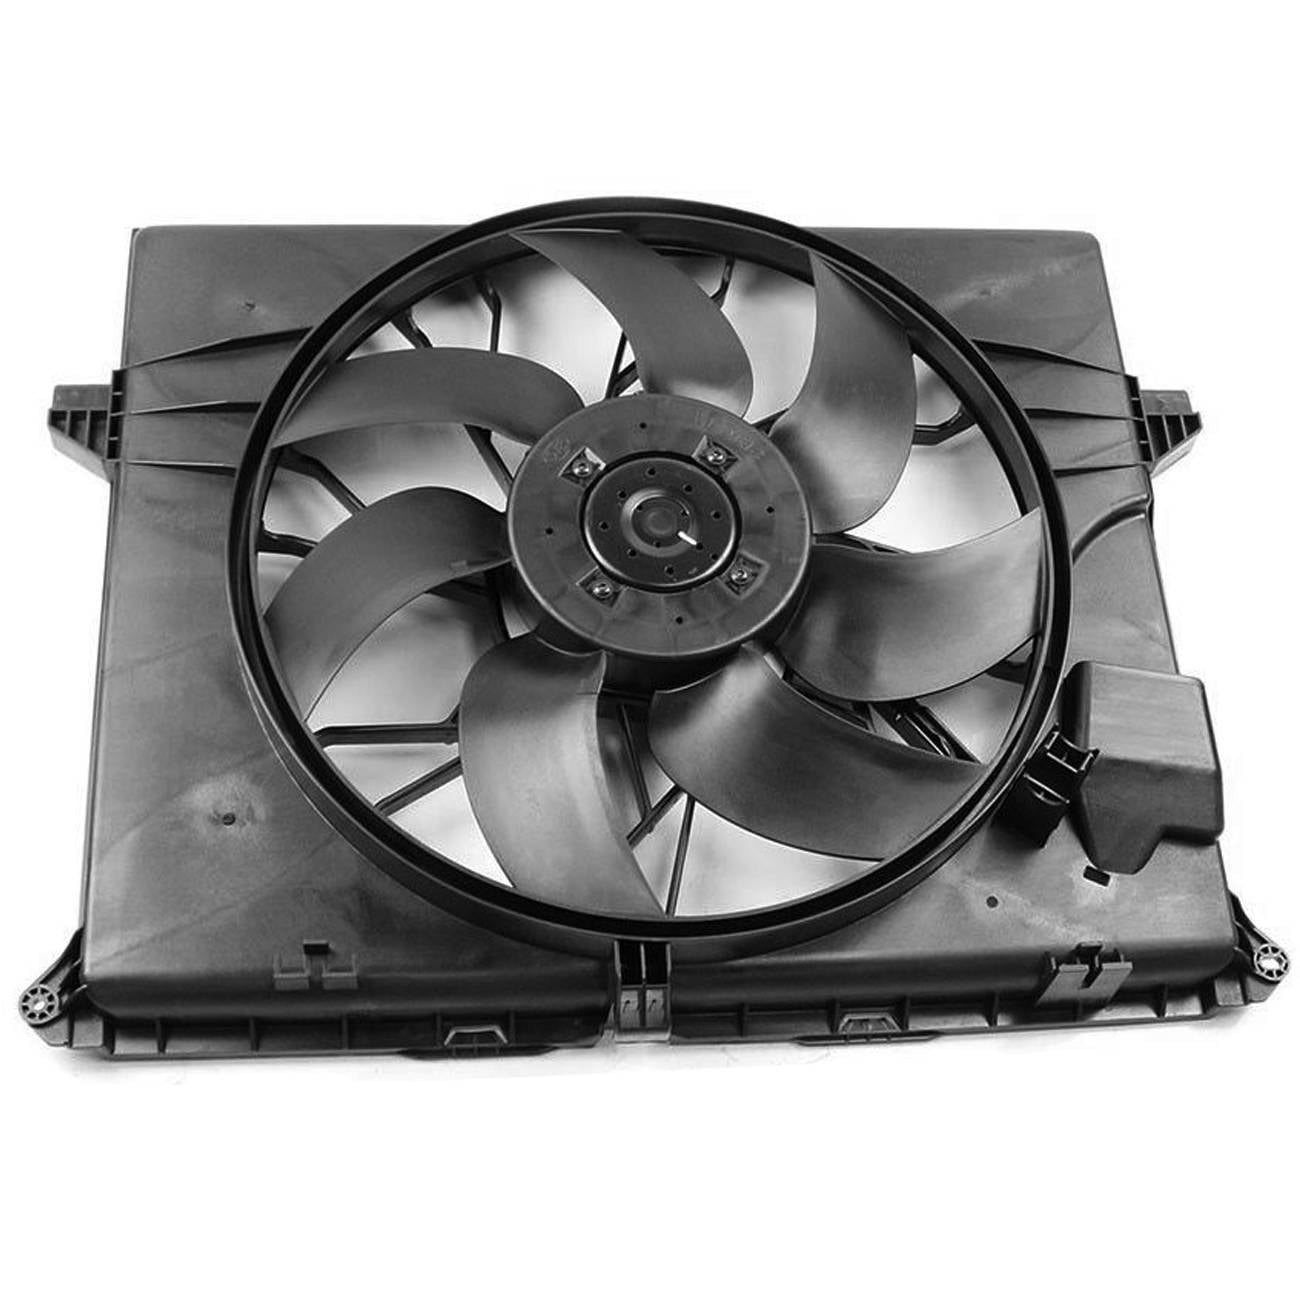 Radiator Cooling Fan Assembly for Mercedes Benz ML350 ML450 ML500 R350 R320 R500 